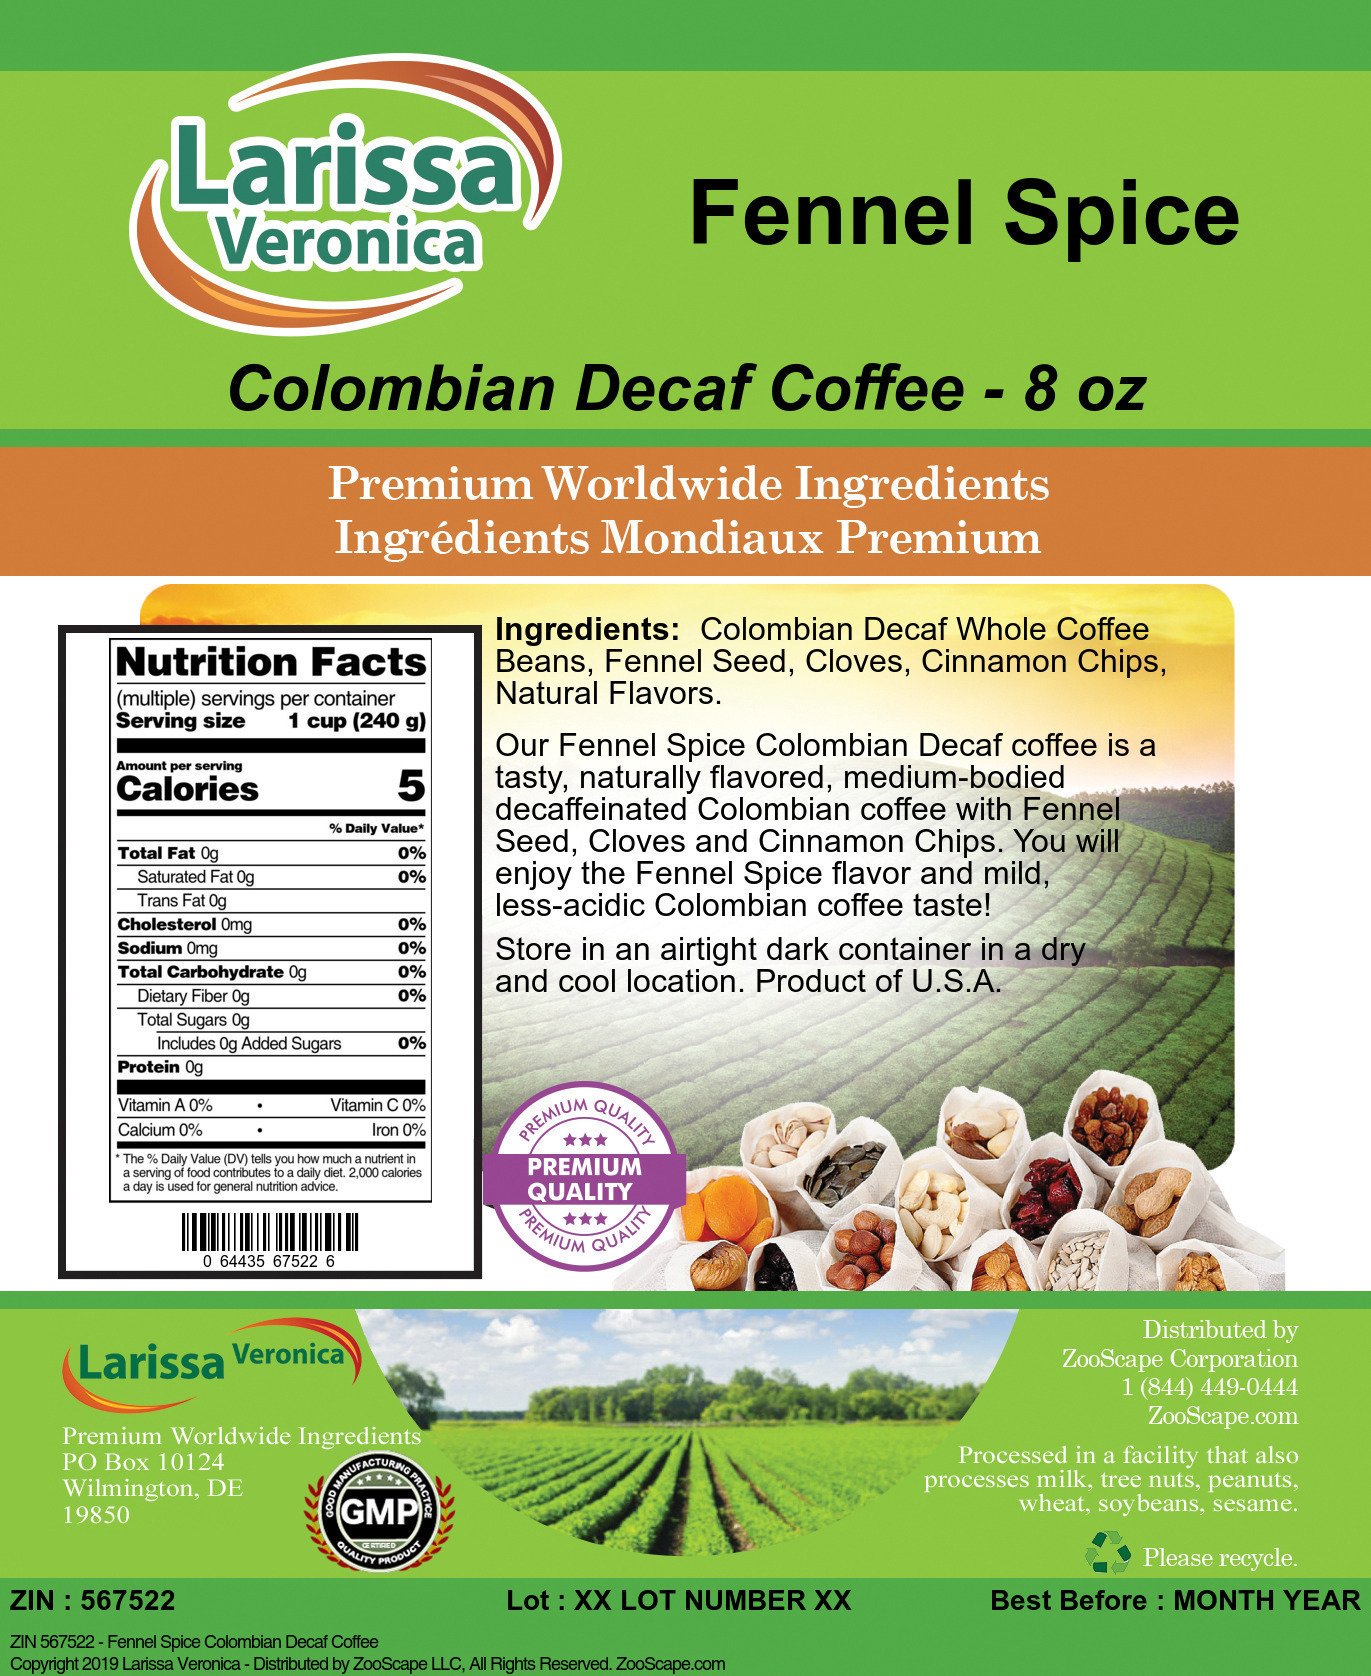 Fennel Spice Colombian Decaf Coffee - Label